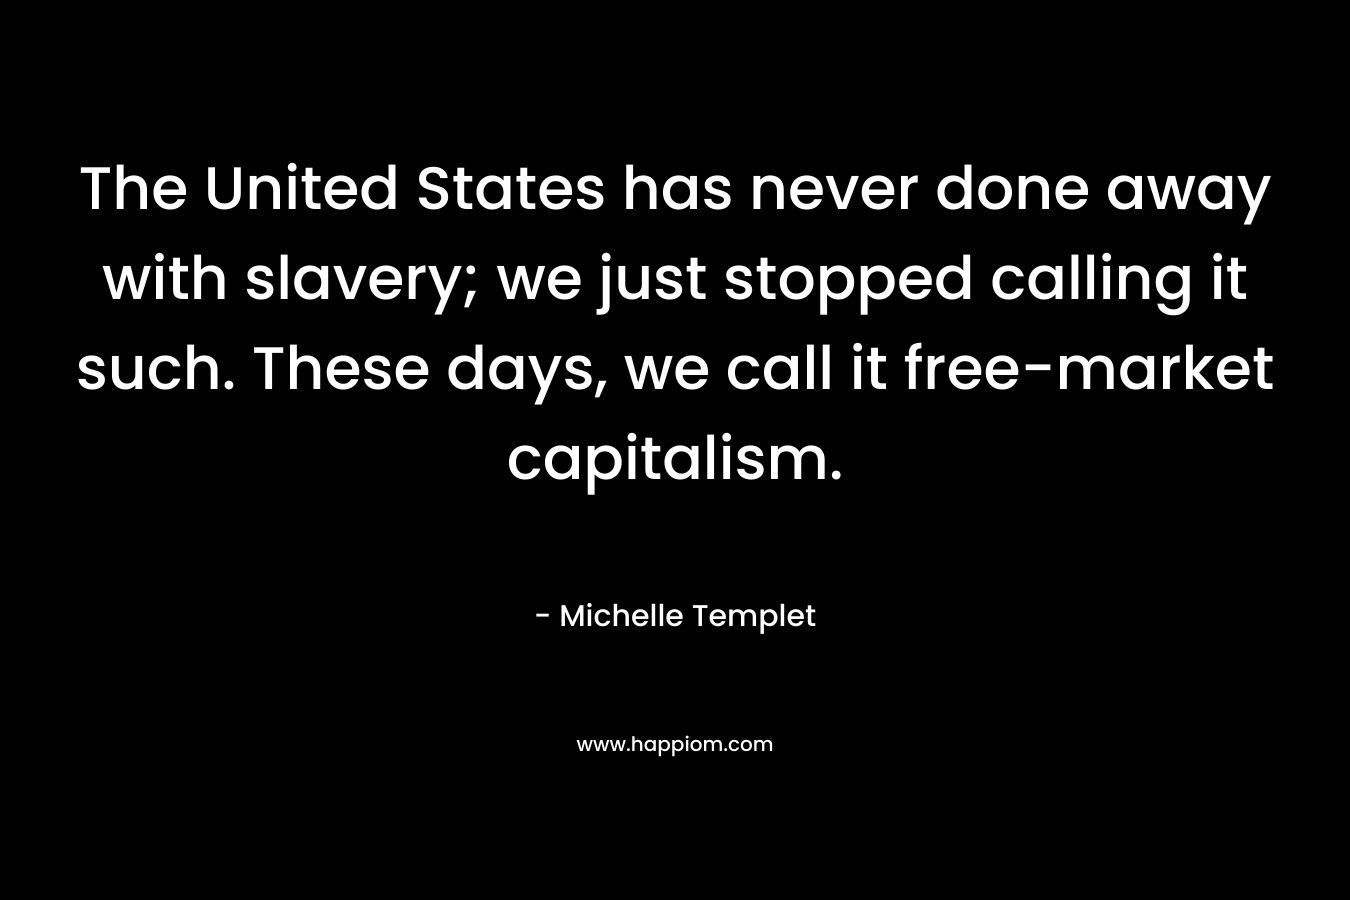 The United States has never done away with slavery; we just stopped calling it such. These days, we call it free-market capitalism.